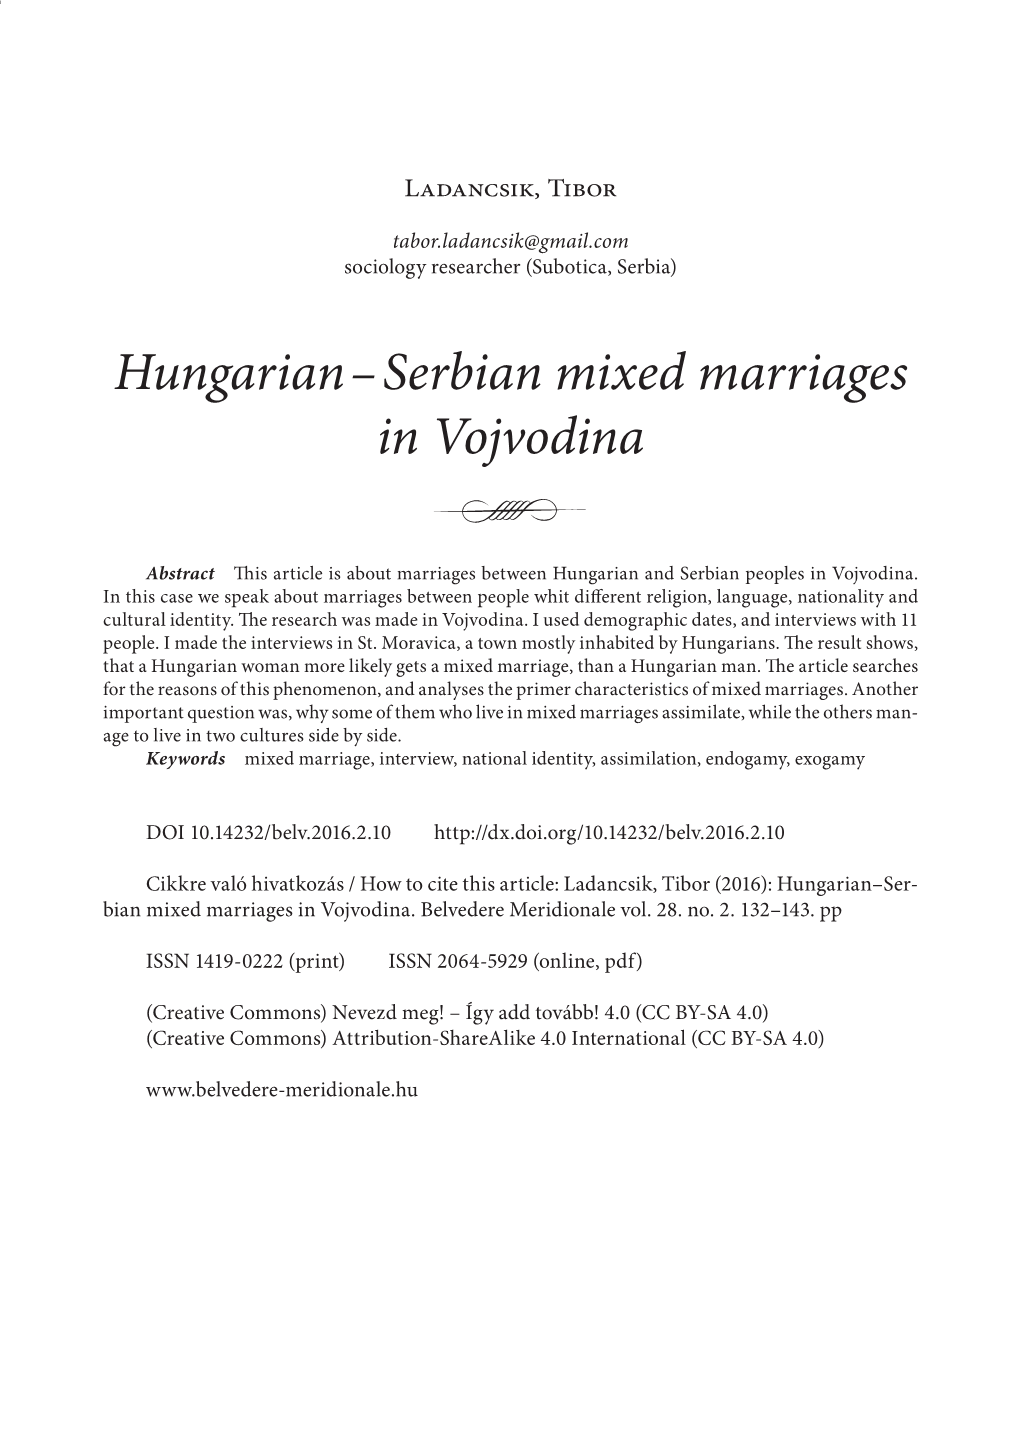 Hungarian– Serbian Mixed Marriages in Vojvodina